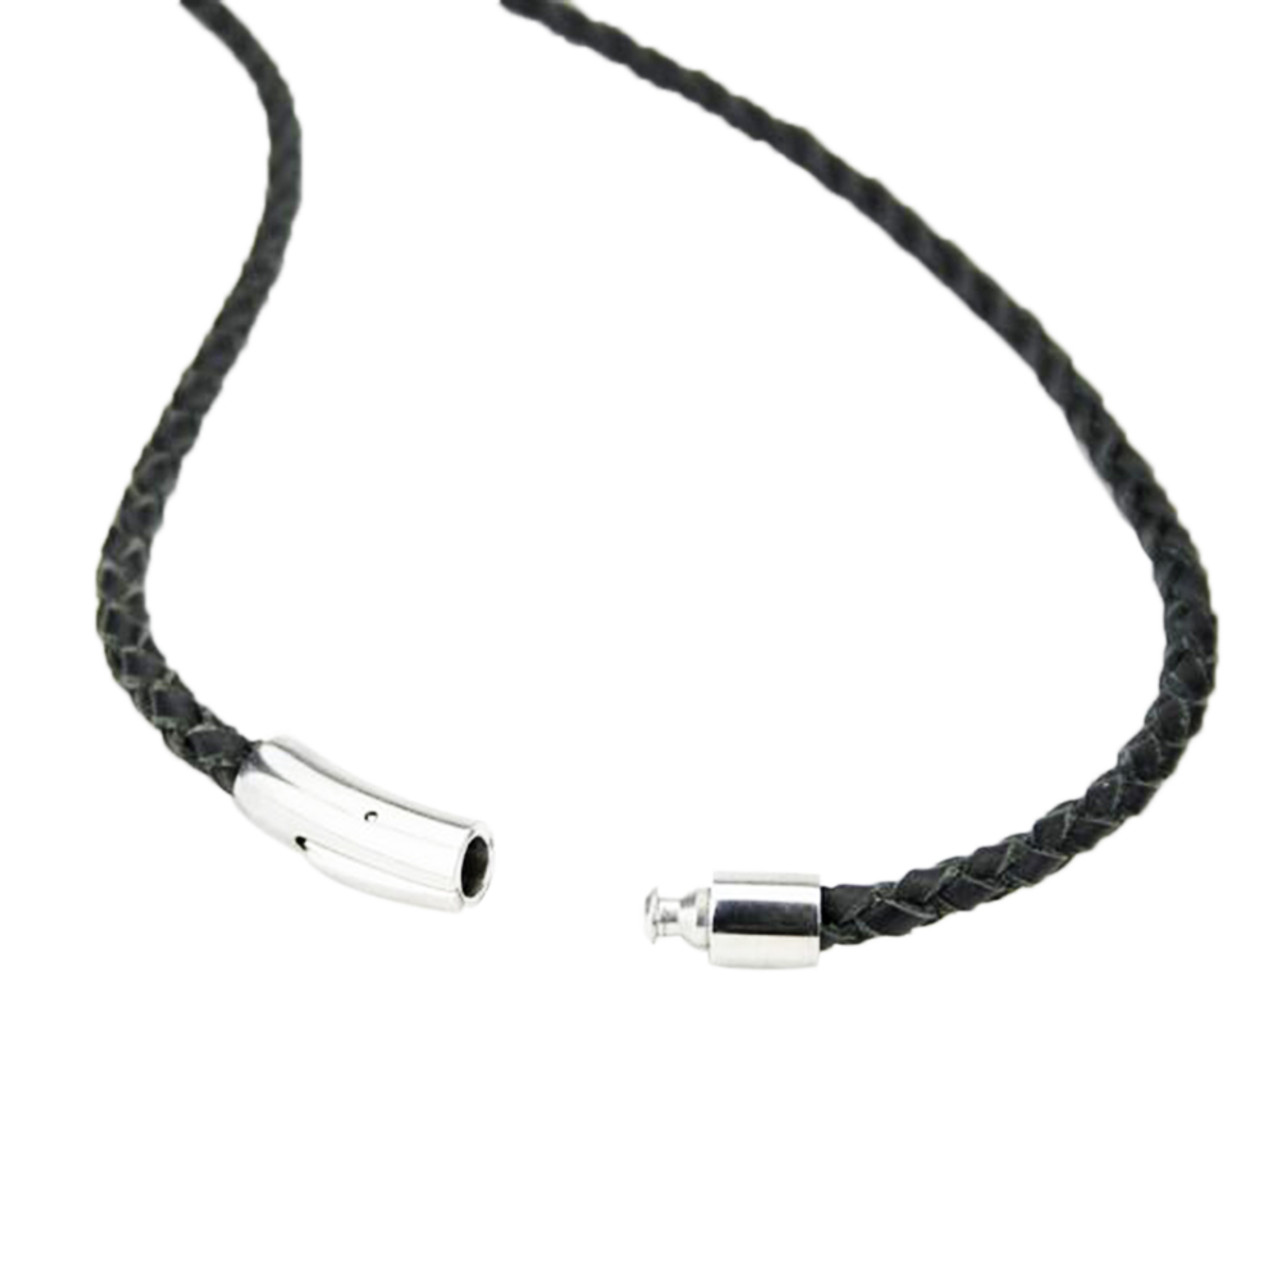 1-1/2 Loop - Braided Leather Lanyard with Tails